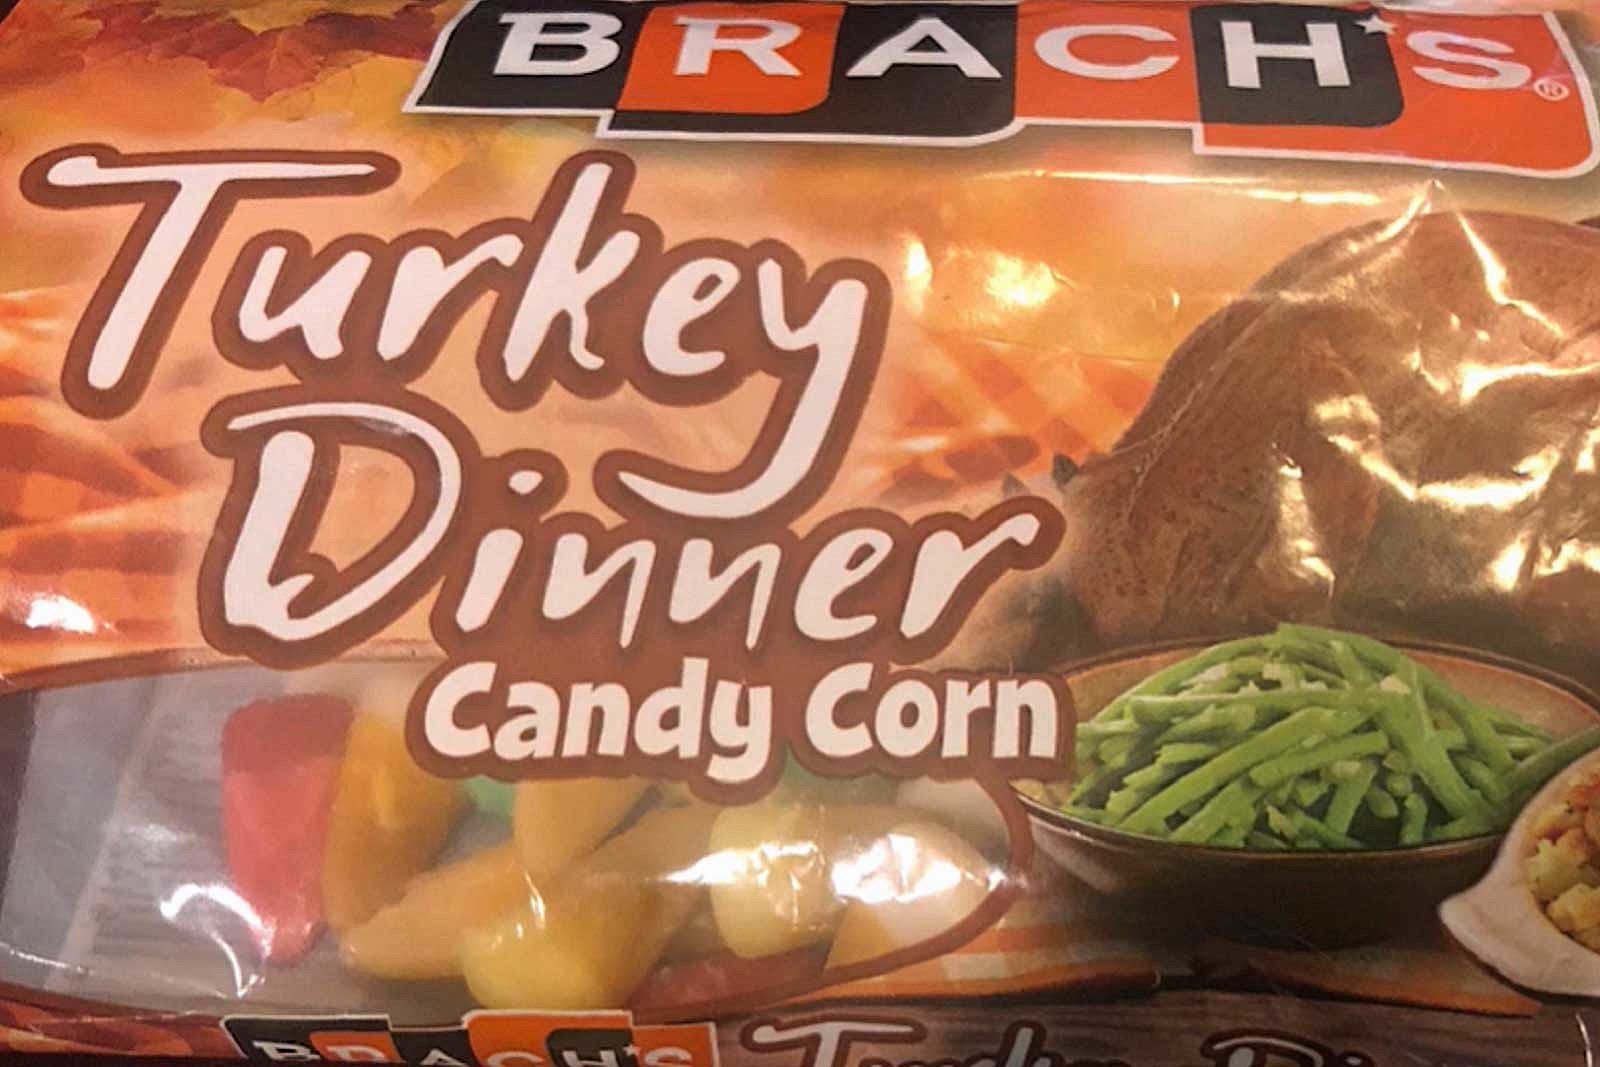 Brach's Releases Candy Corn Flavored Like Thanksgiving Dinner